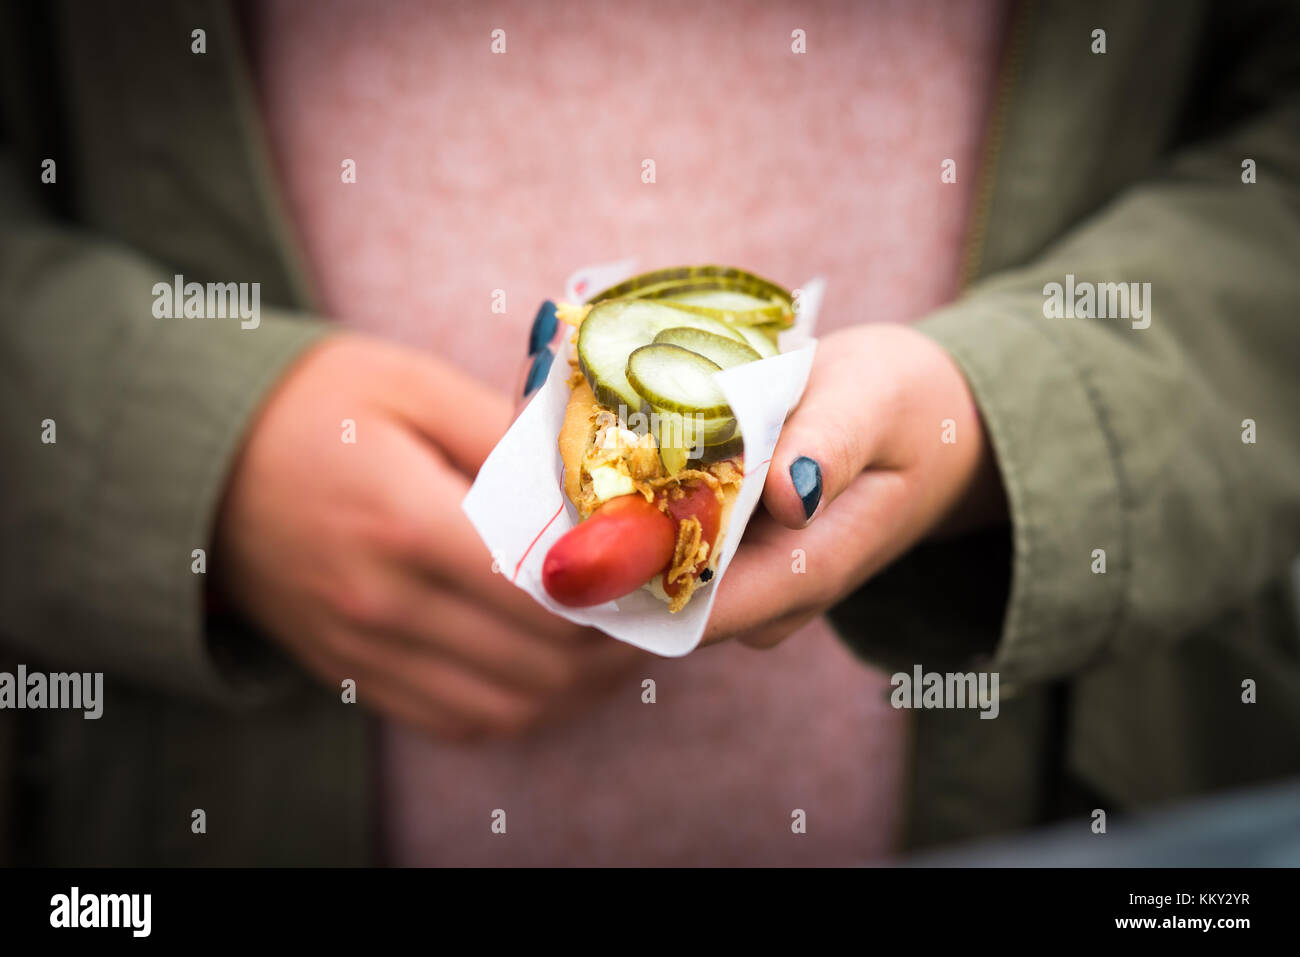 A hot dog in the hands of a girl Stock Photo